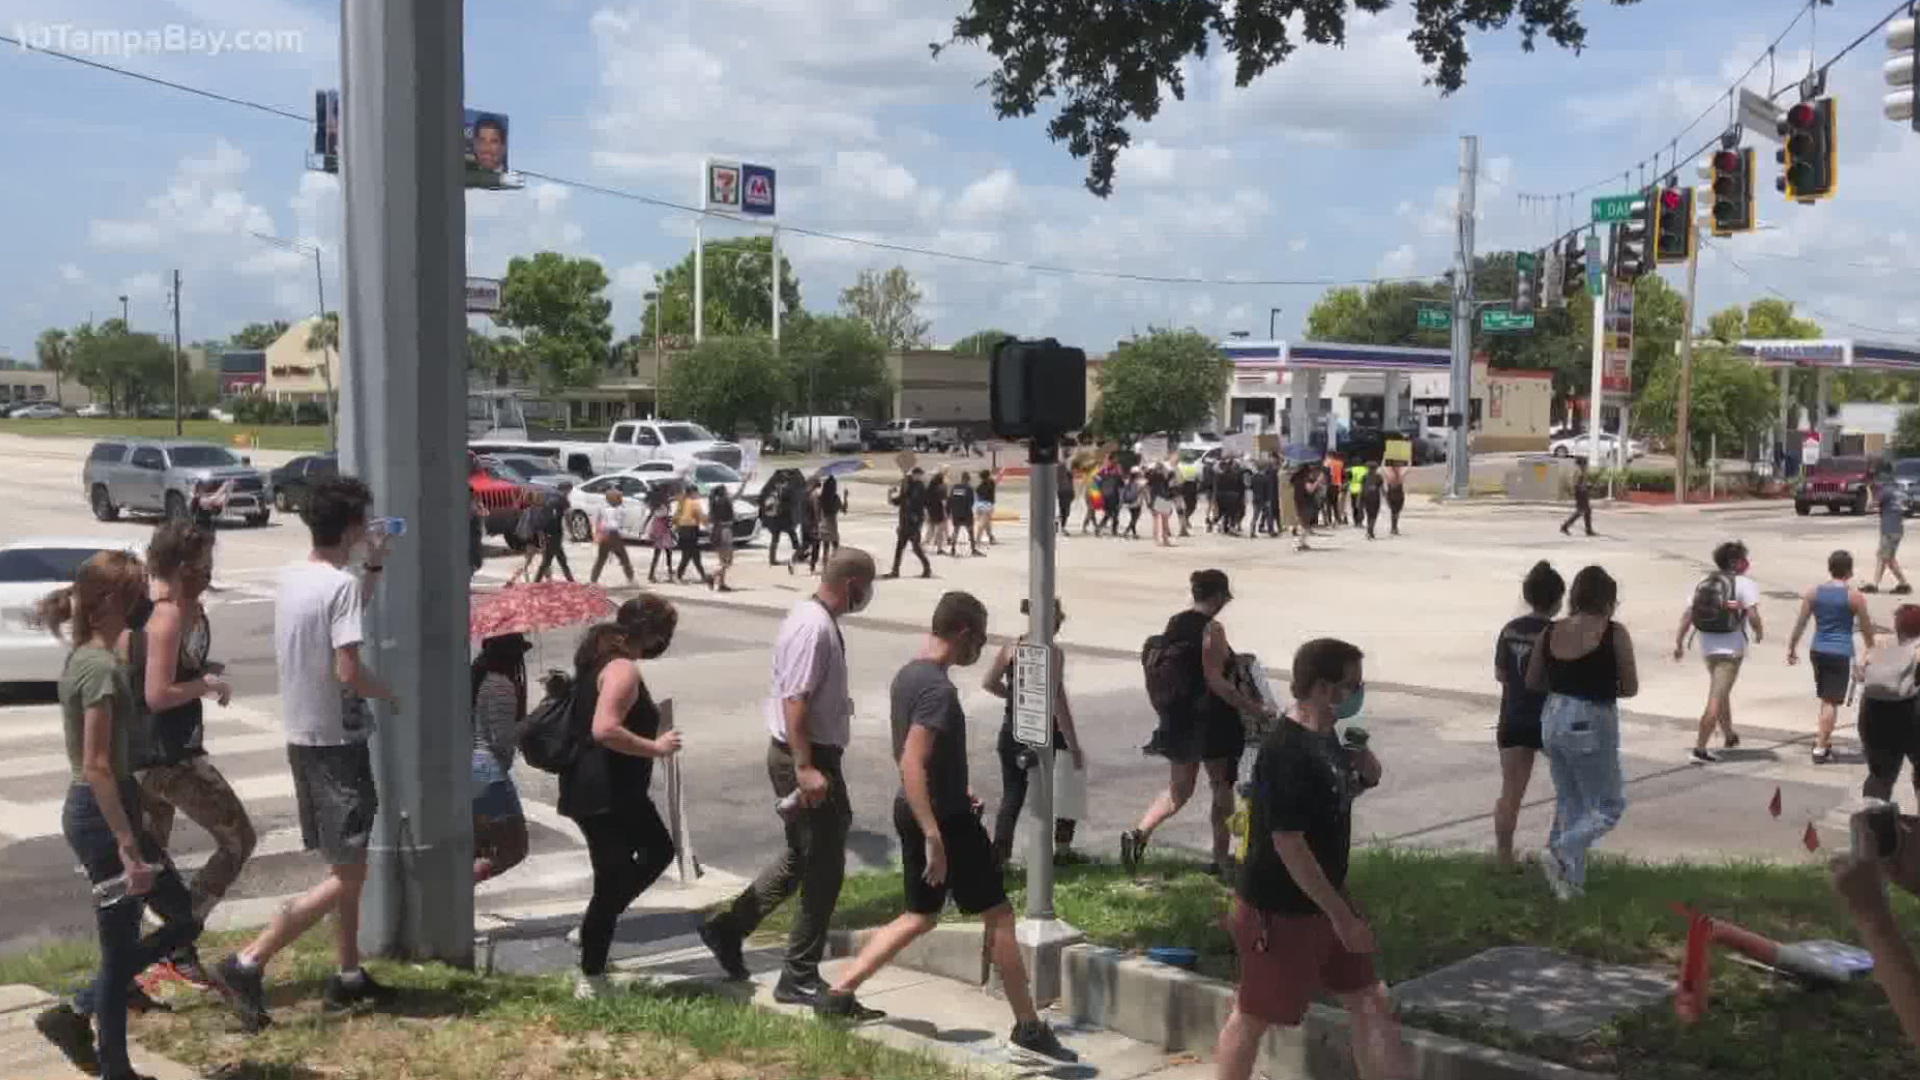 In Tampa, protesters shut down the intersection of Spruce and Dale Mabry starting around 12:30 p.m. Saturday.